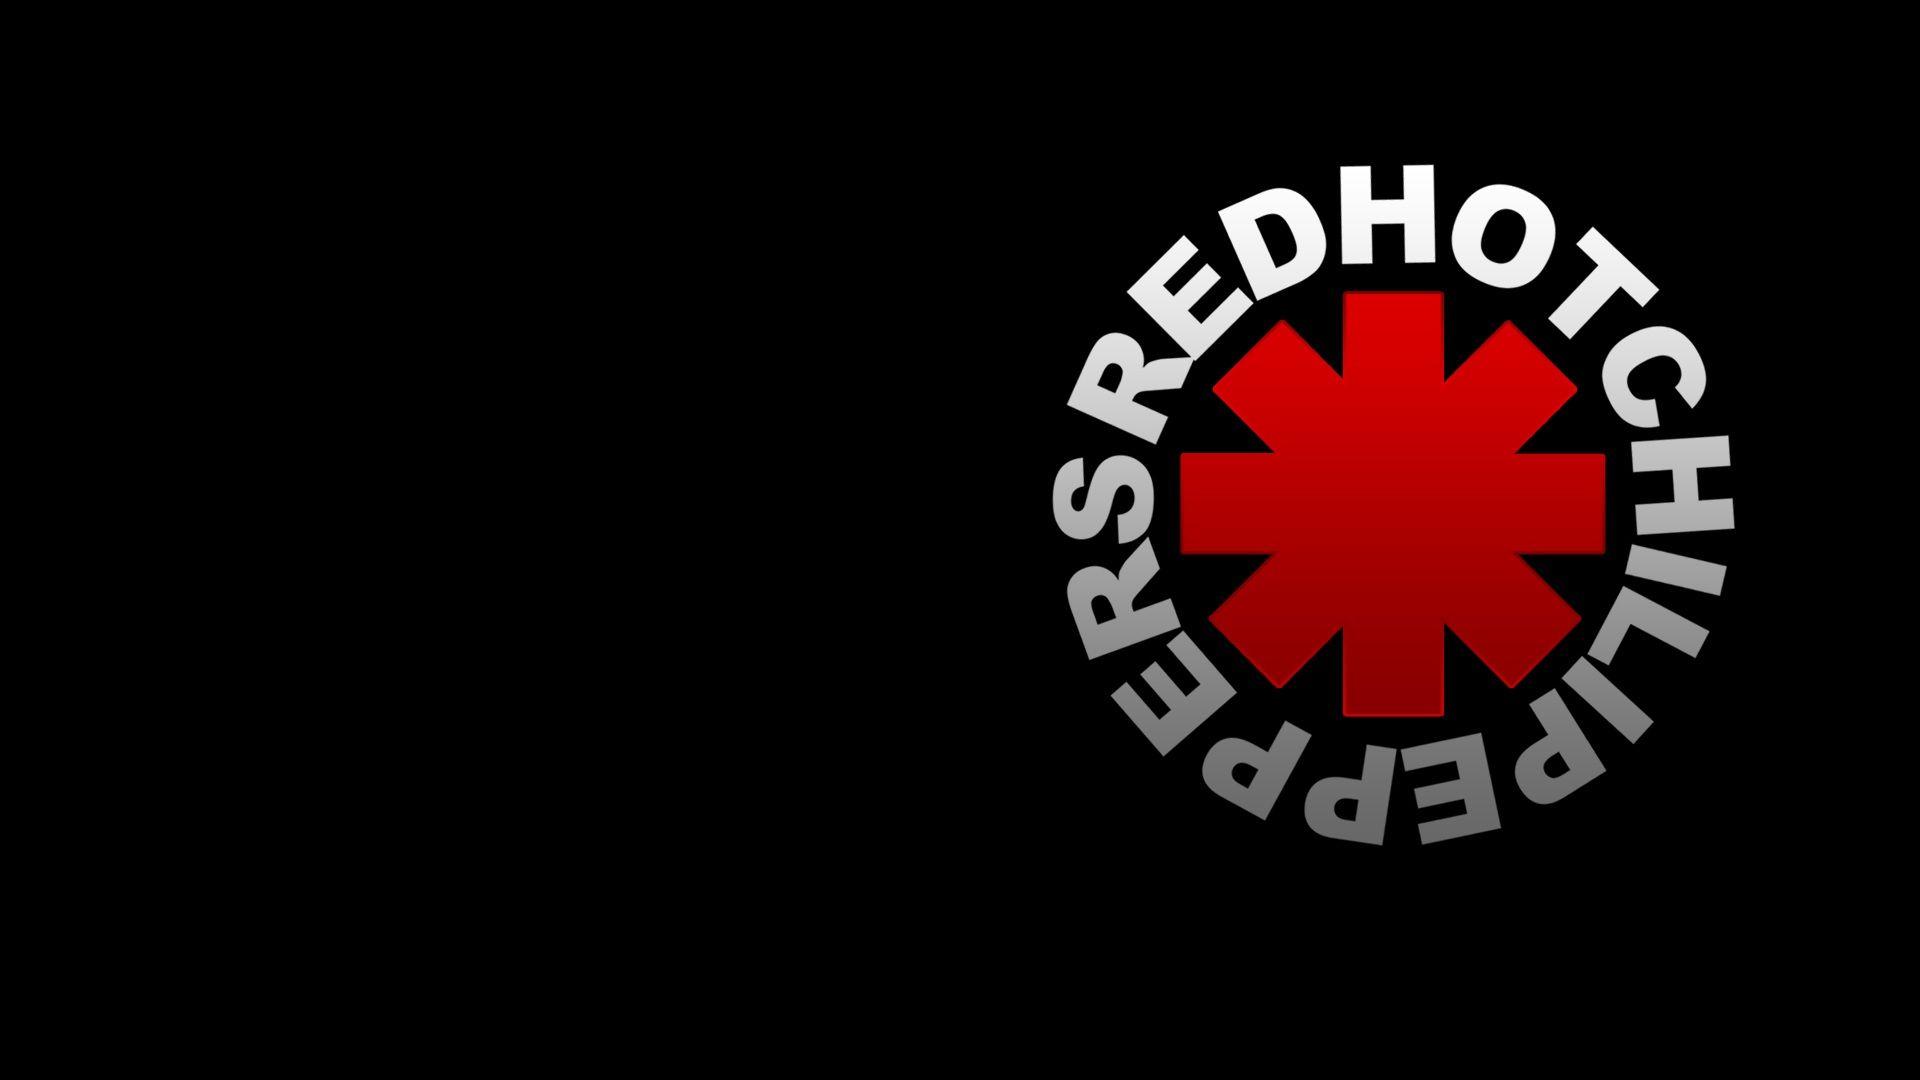 Red Hot Chili Peppers Wallpapers Top Free Red Hot Chili Peppers Backgrounds Wallpaperaccess